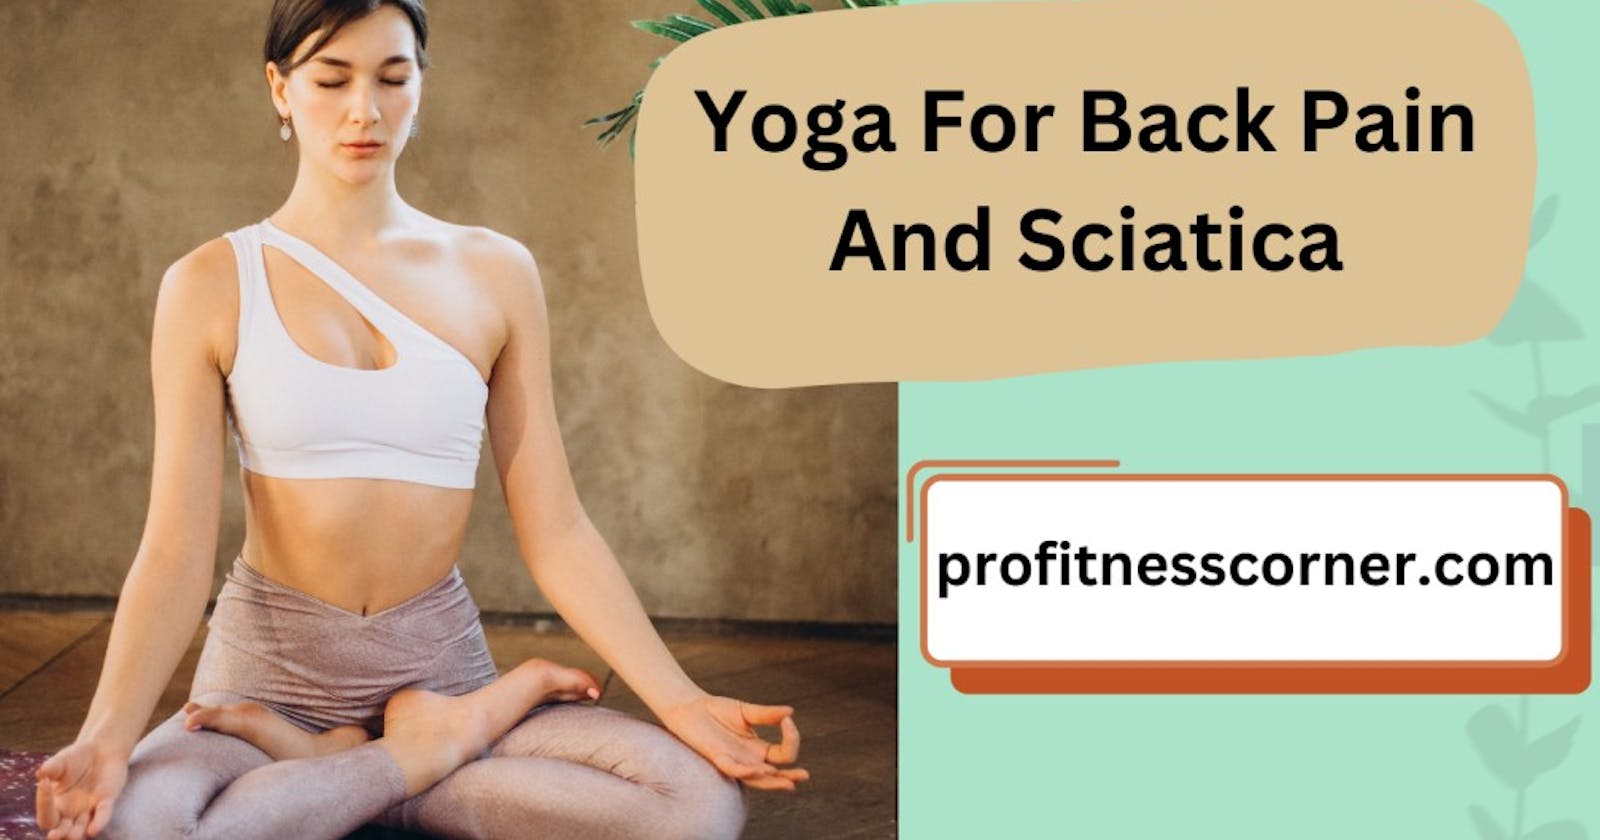 Yoga For Back Pain And Sciatica